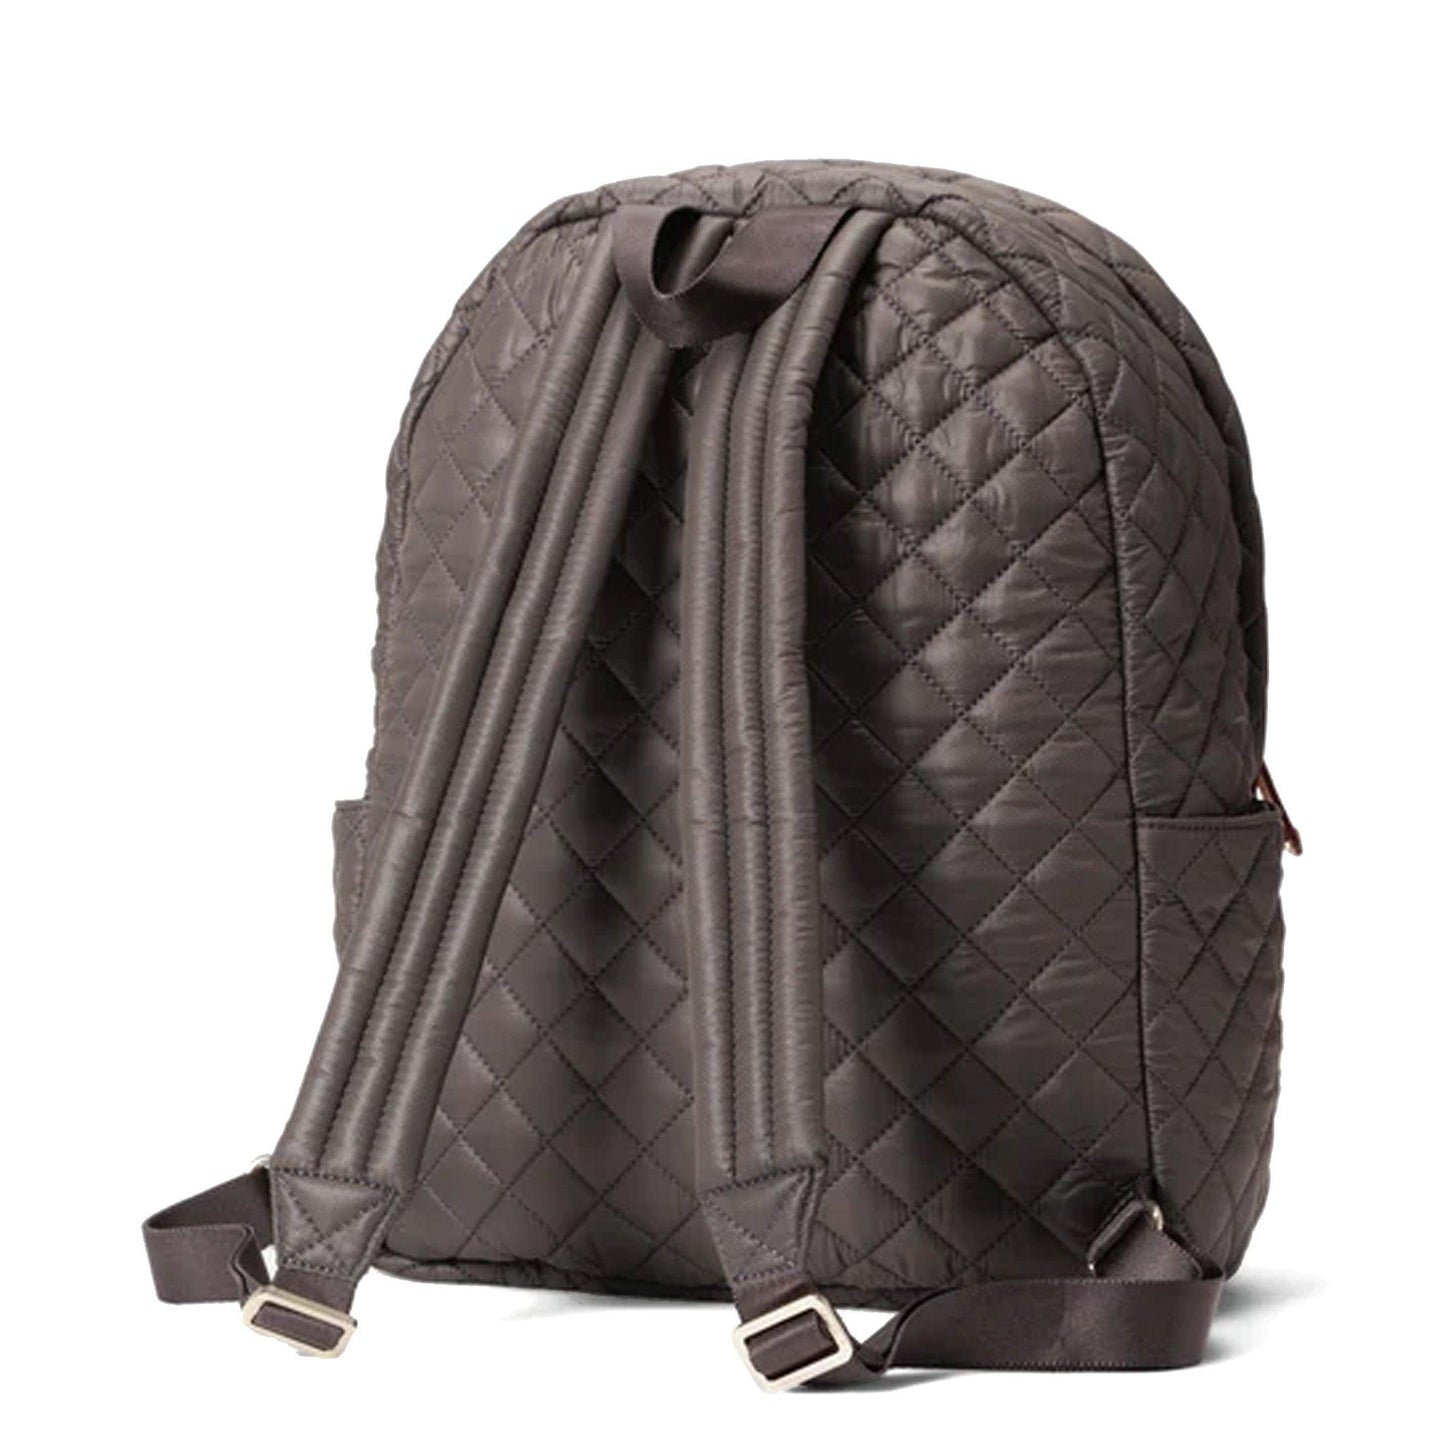 Magnet City Metro Backpack - Cosmos Boutique New Jersey